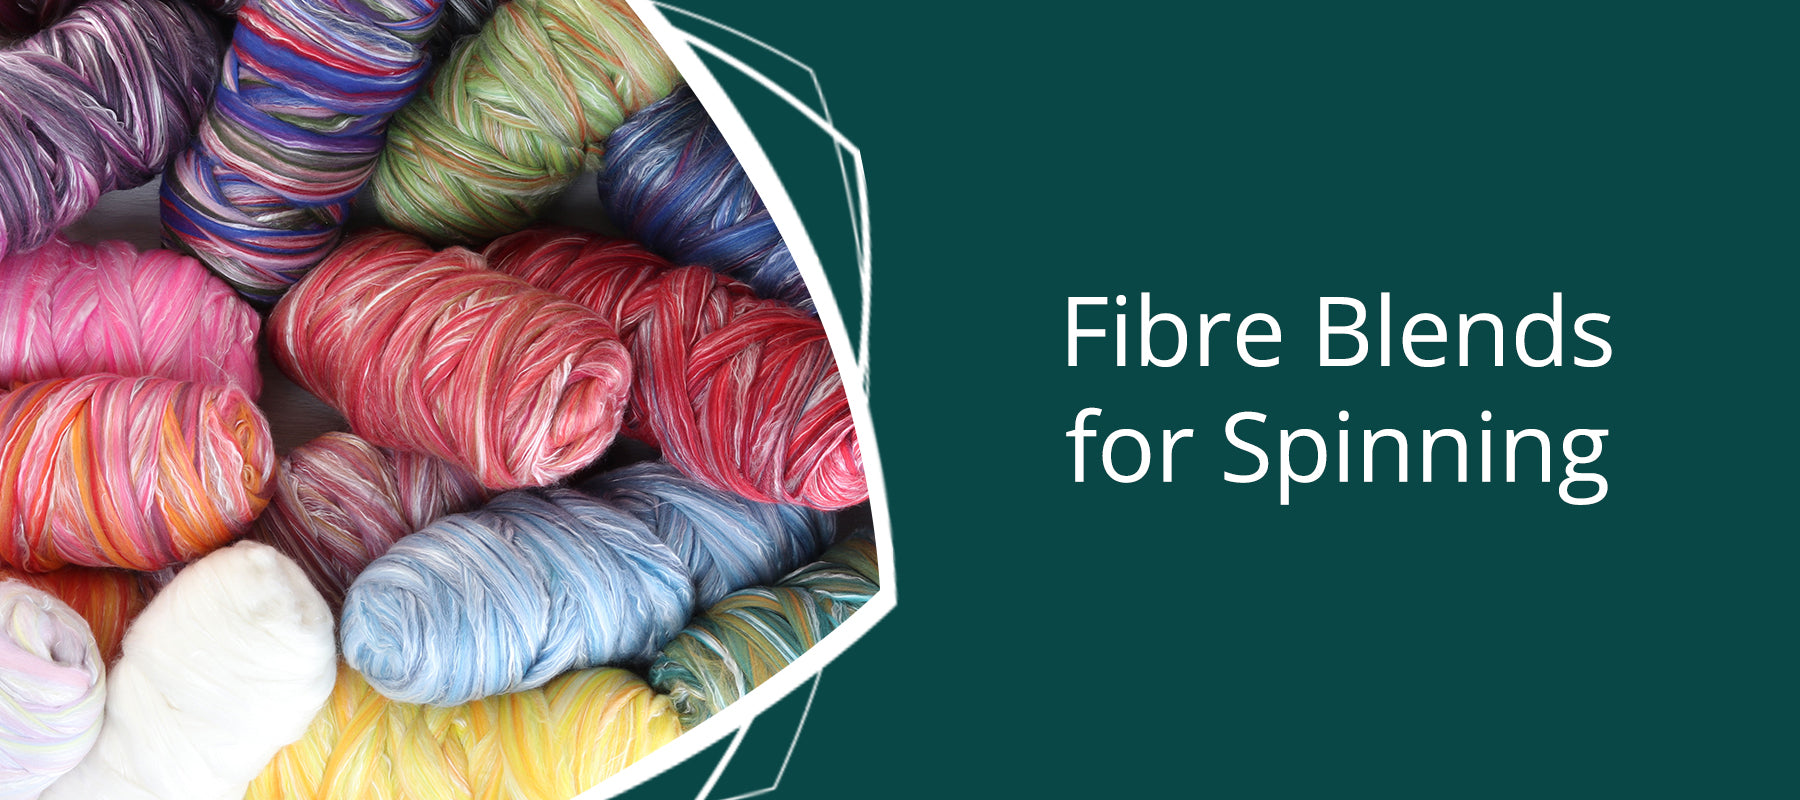 Fibre Blends for Spinning - Thread Collective Australia